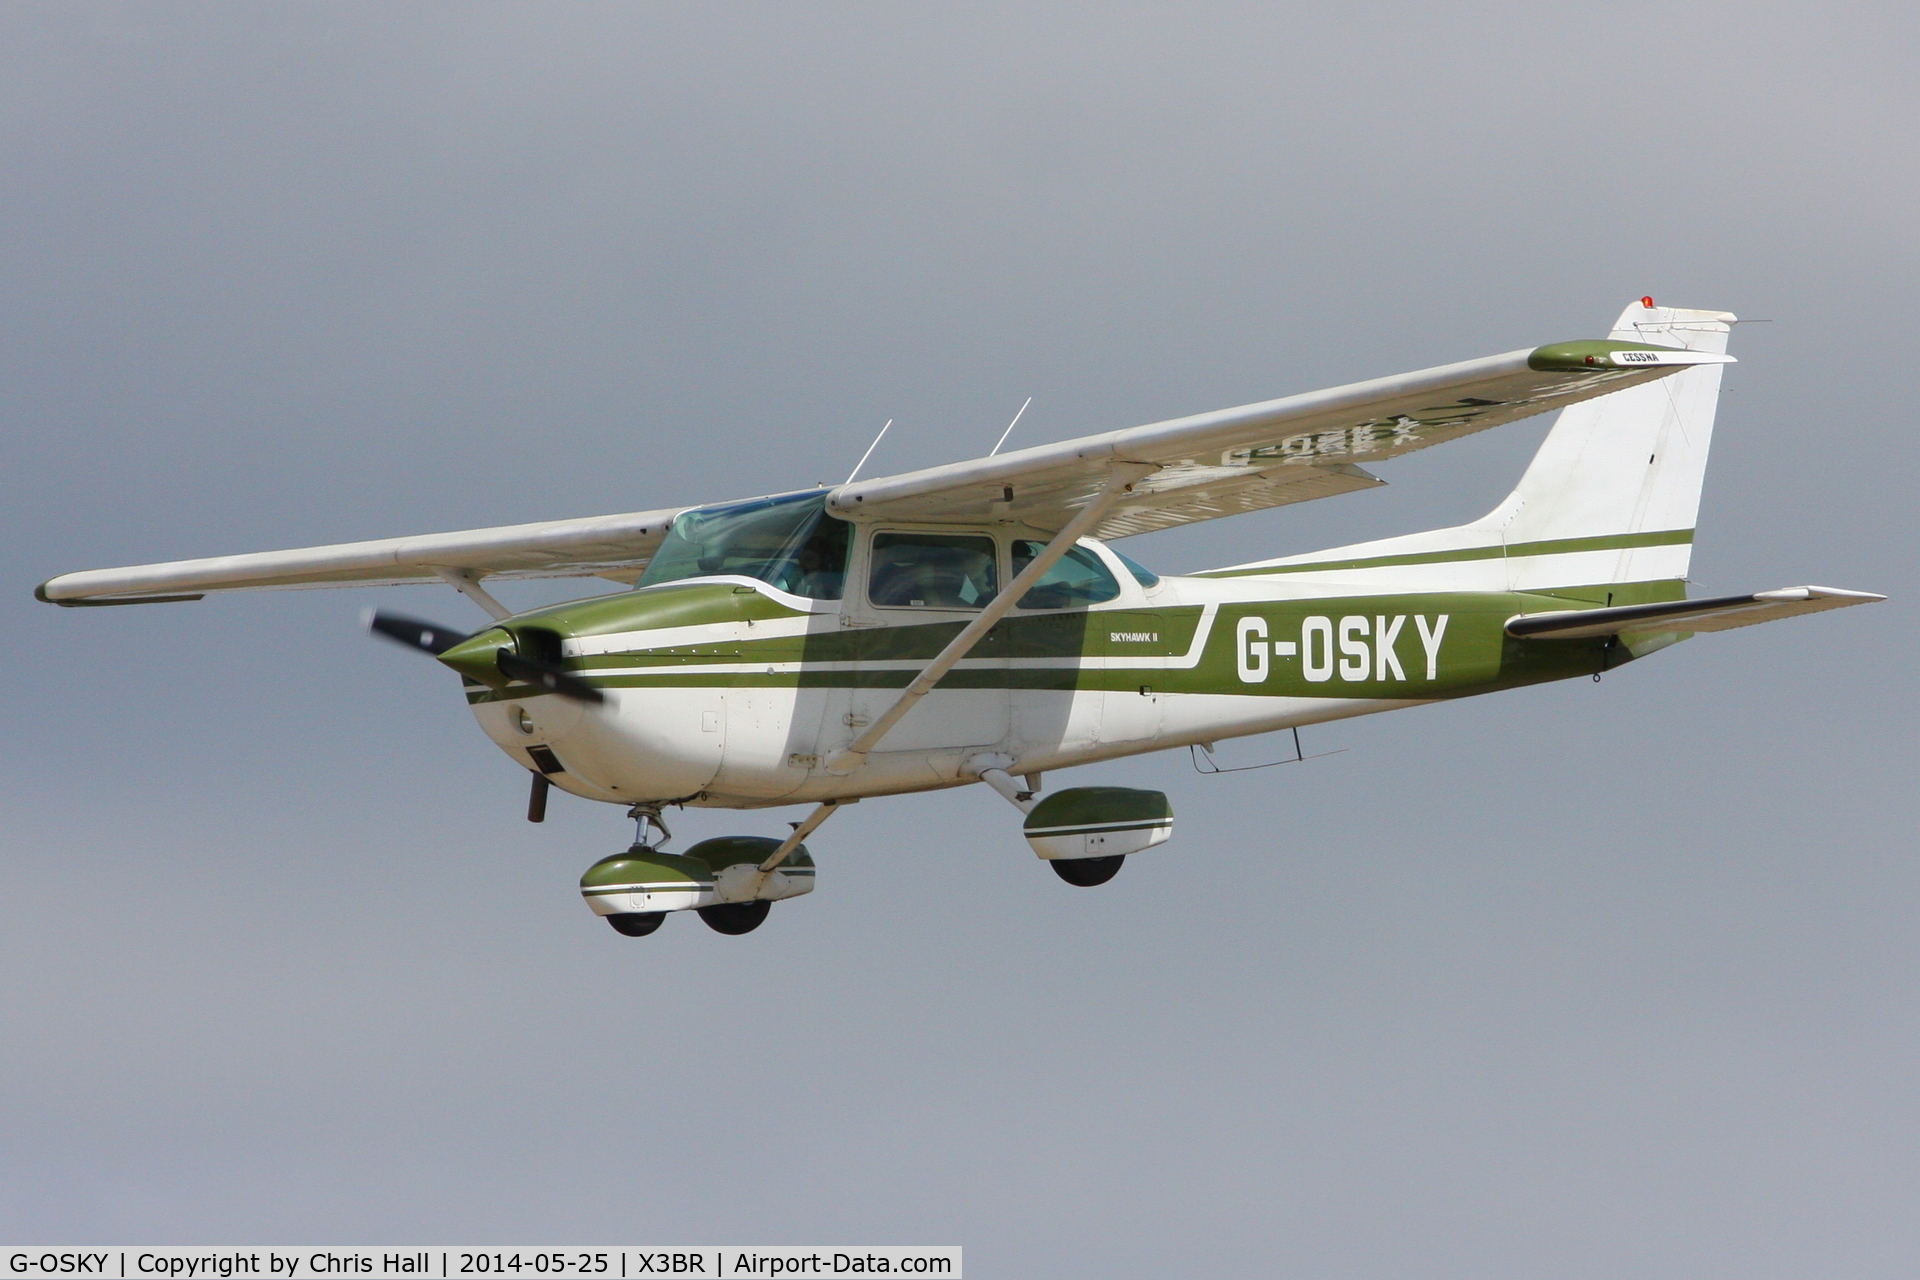 G-OSKY, 1976 Cessna 172M C/N 172-67389, visitor at the Cold War Jets Open Day 2014